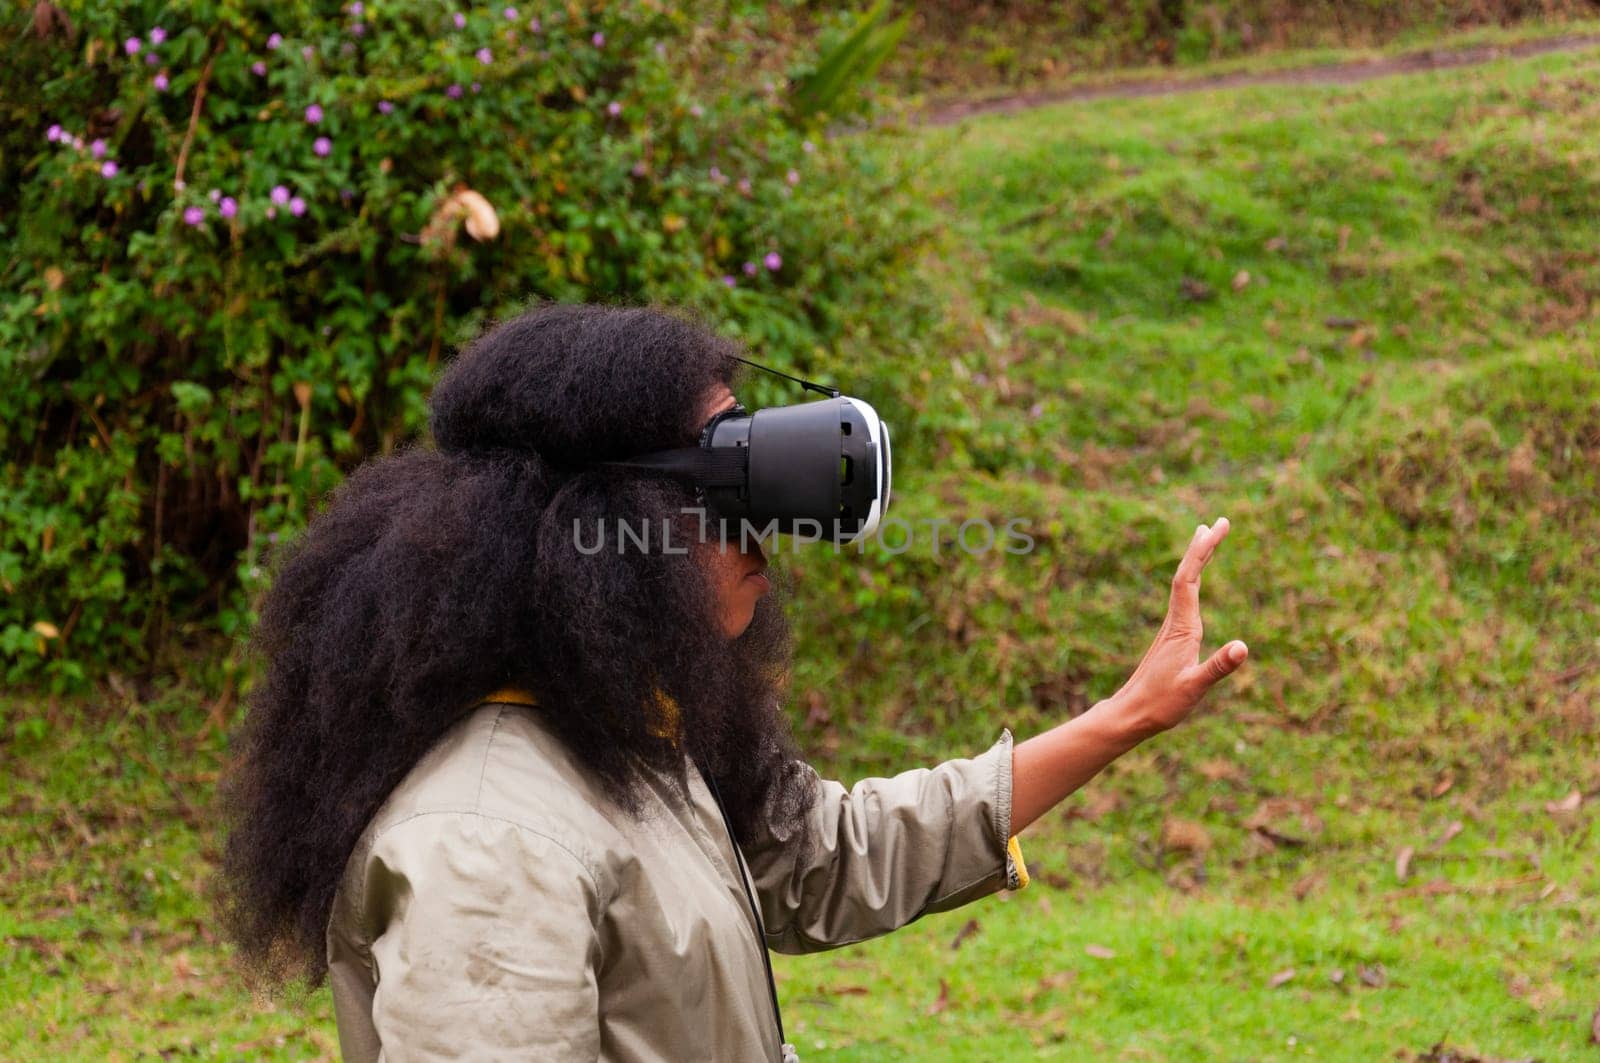 Afro-Ecuadorian girl with virtual reality goggles experiencing the third dimension in nature by Raulmartin